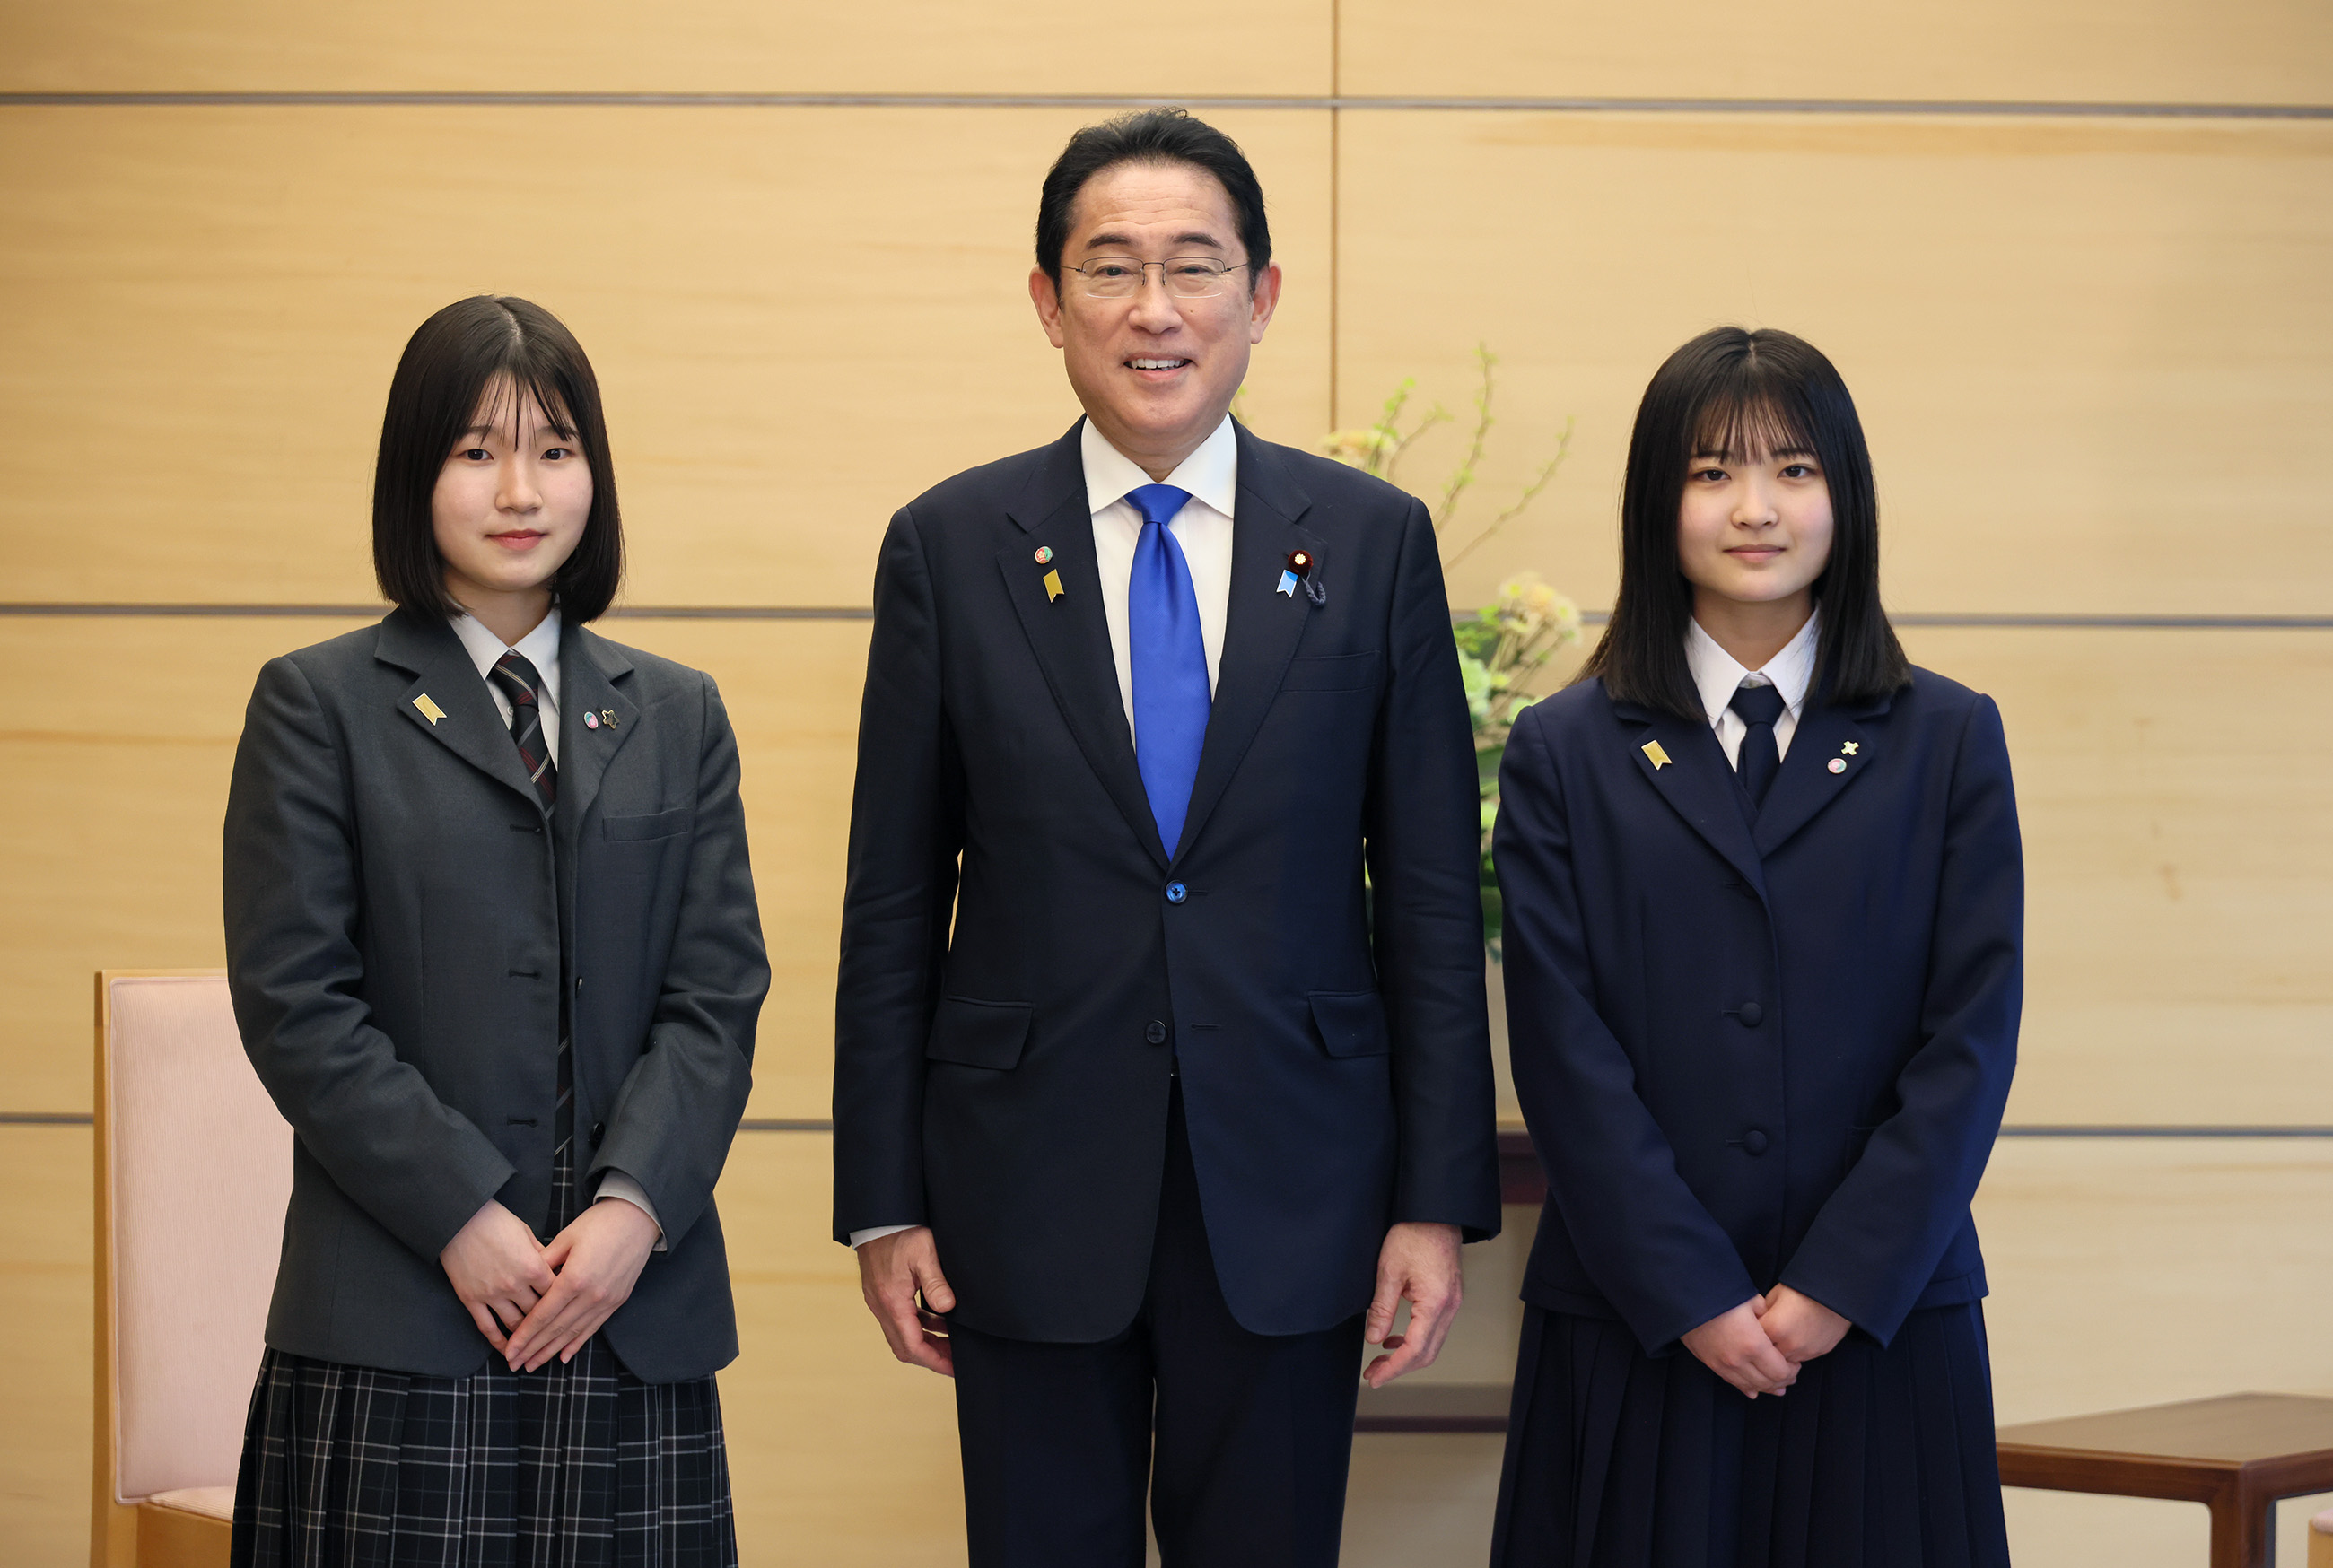 Courtesy Call from Winners of the High School Speech Contest on the Northern Territories